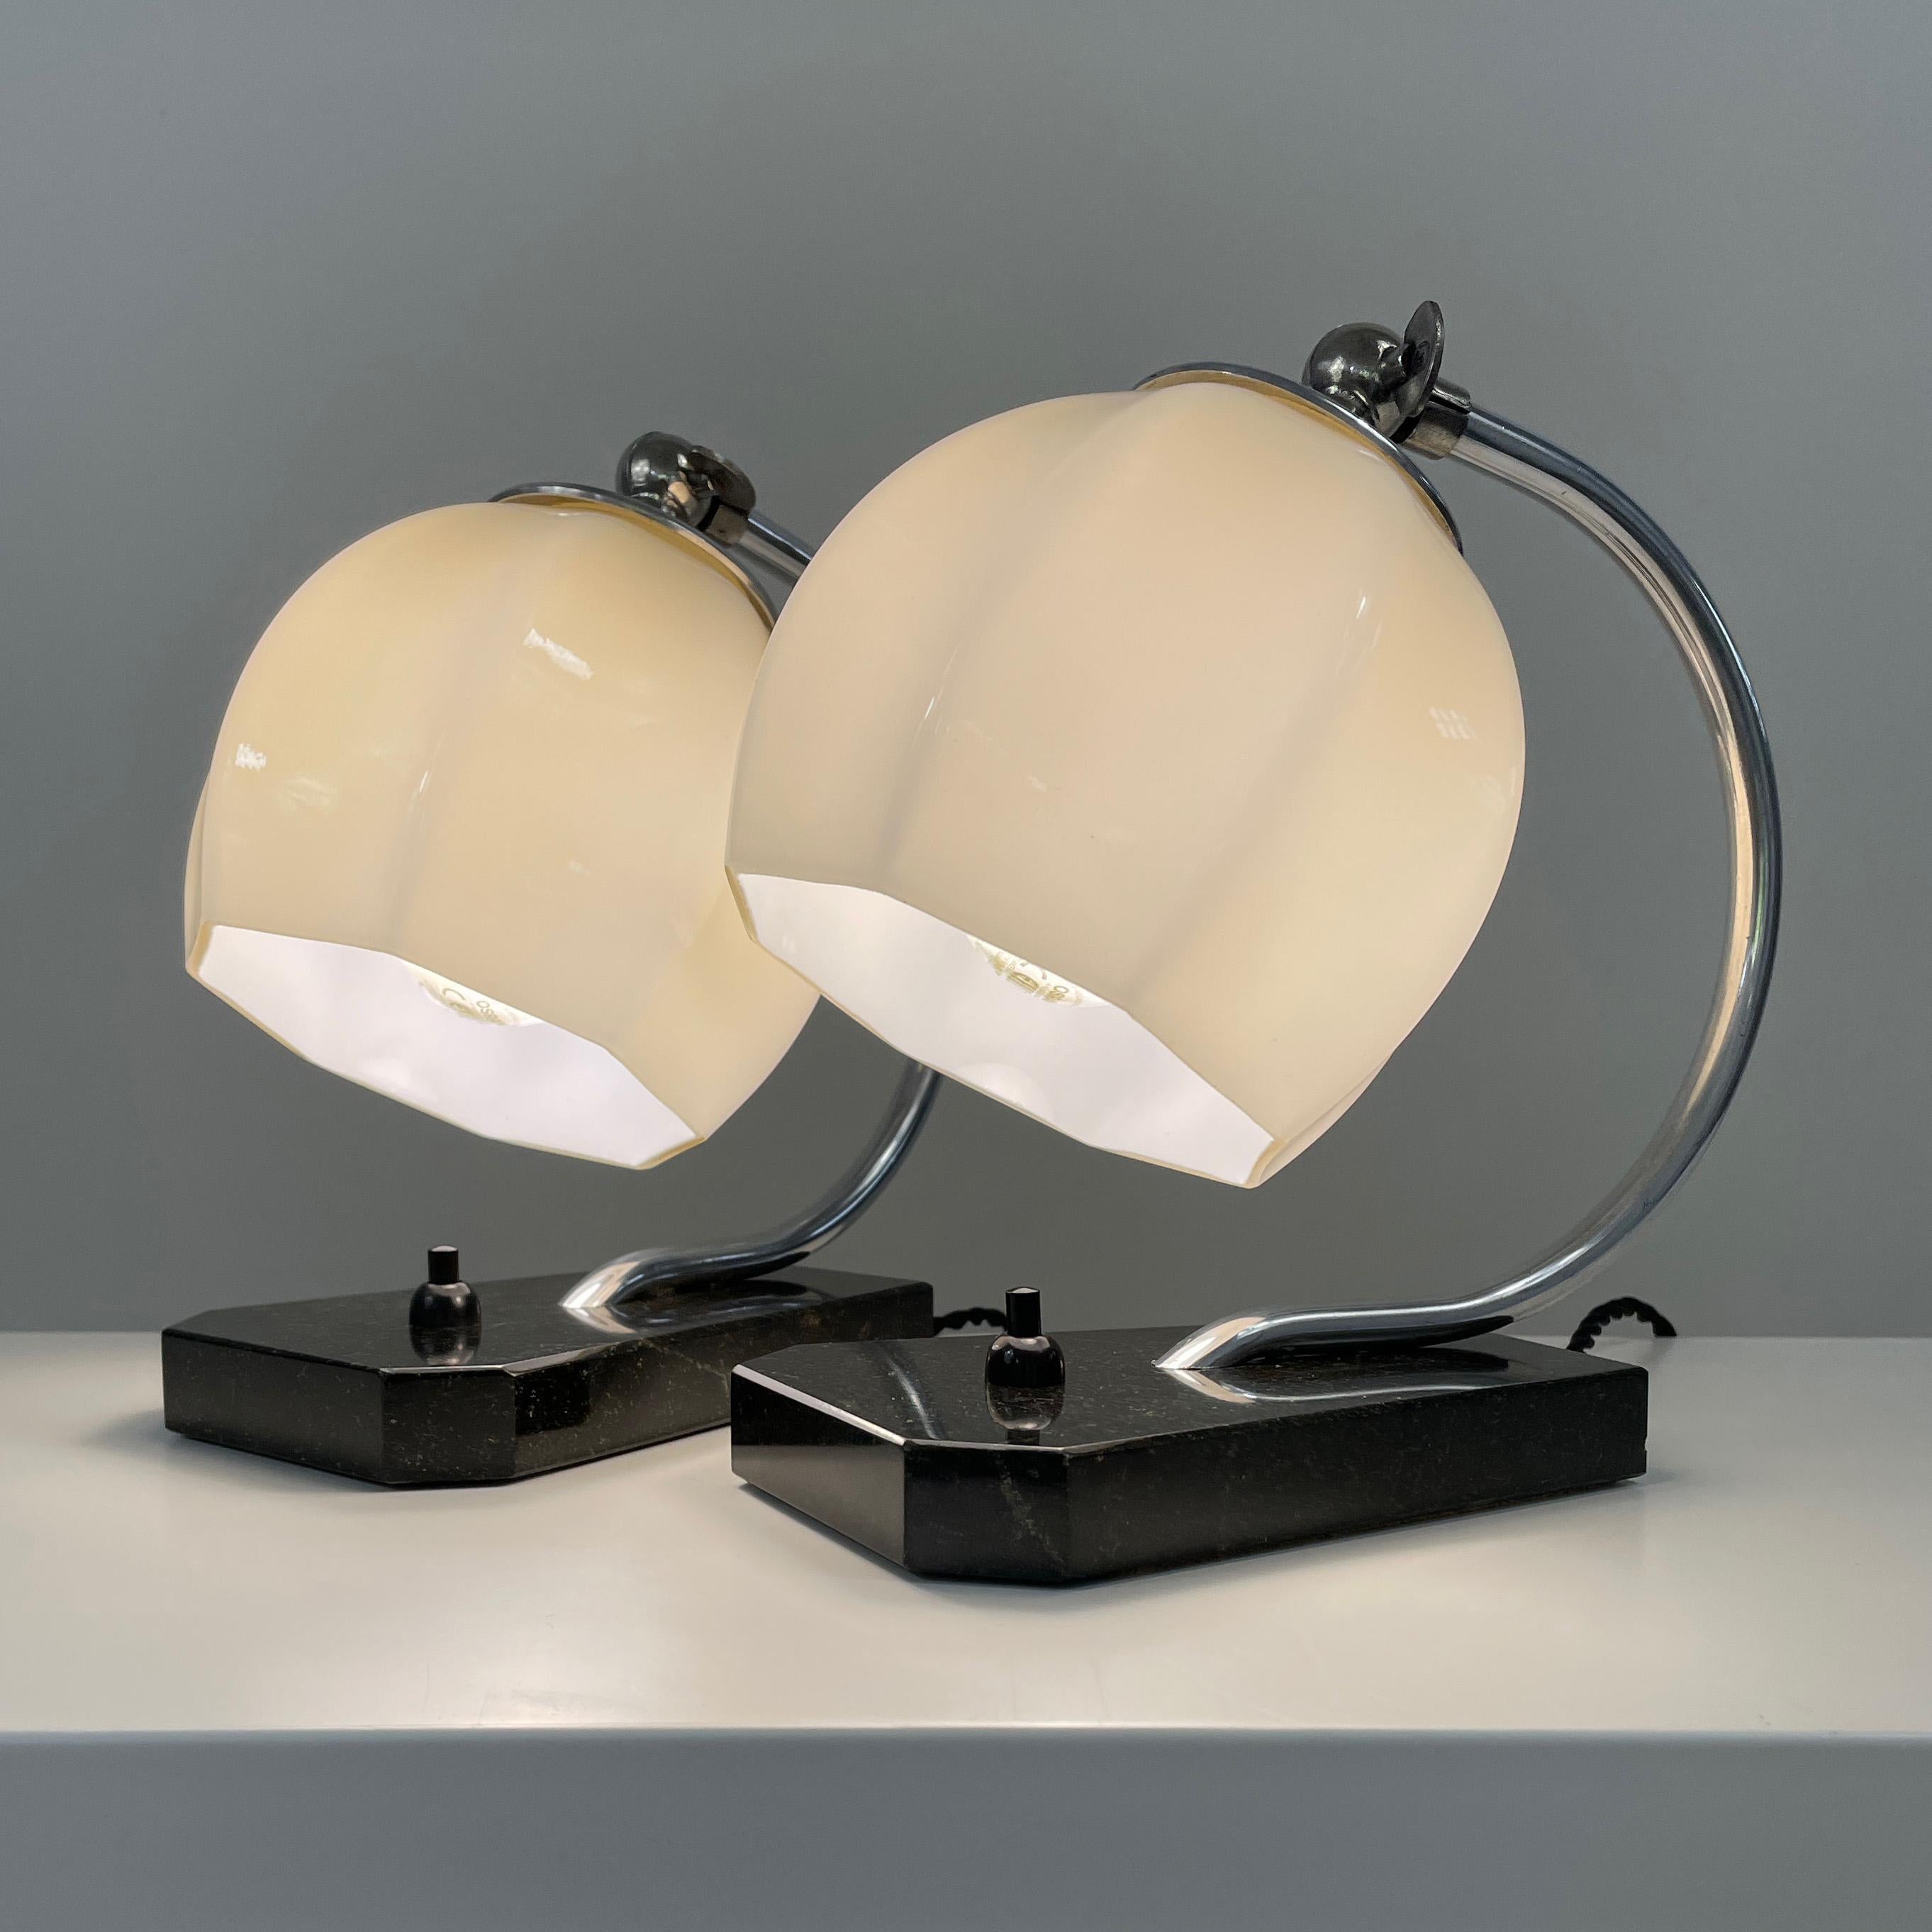 German Art Deco Opaline Glass, Marble and Aluminum Table Lamps, 1930s For Sale 13